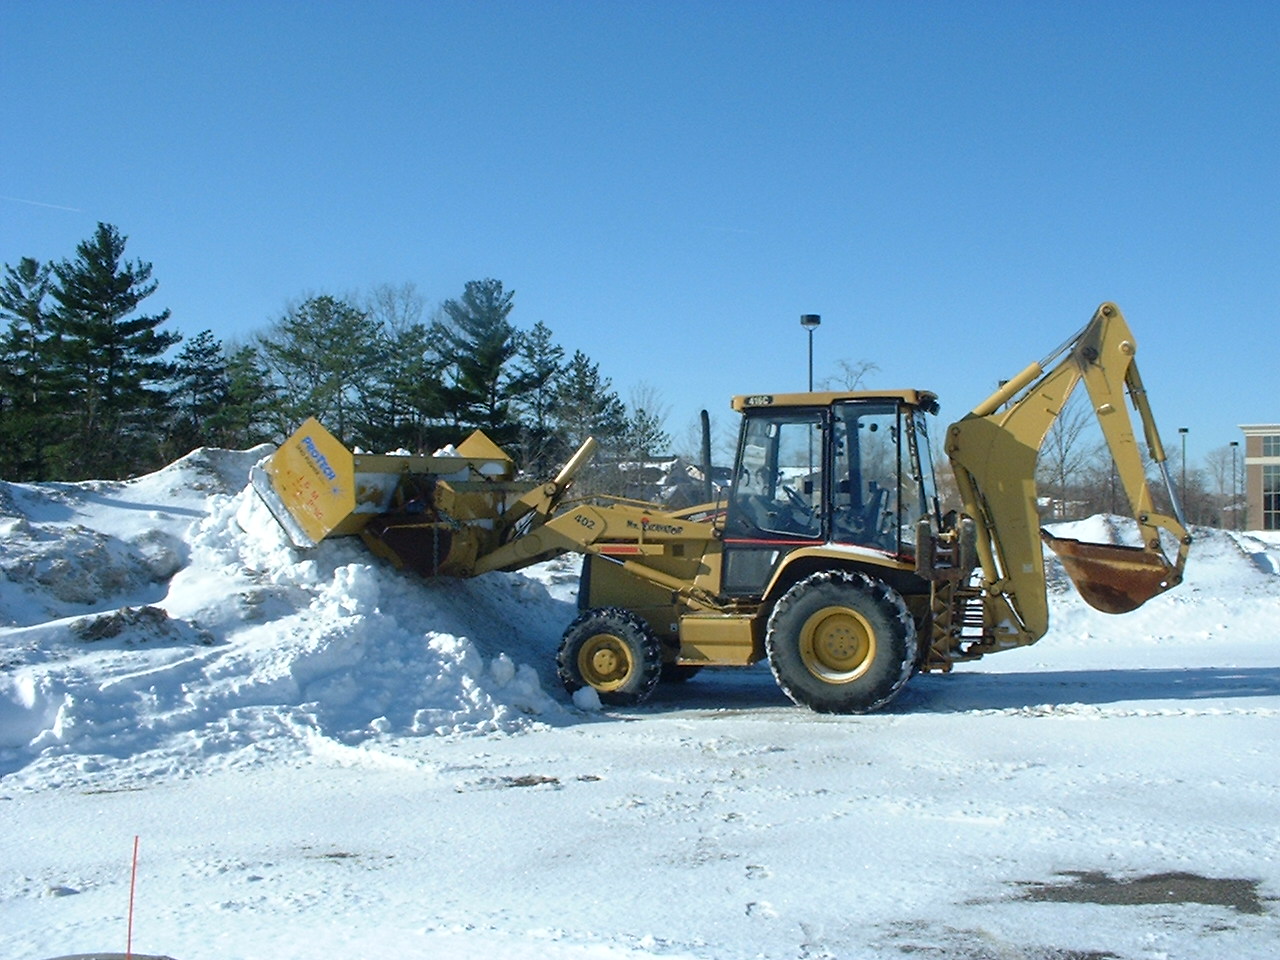 Backhoe Used for Plowing Snow in Cleveland